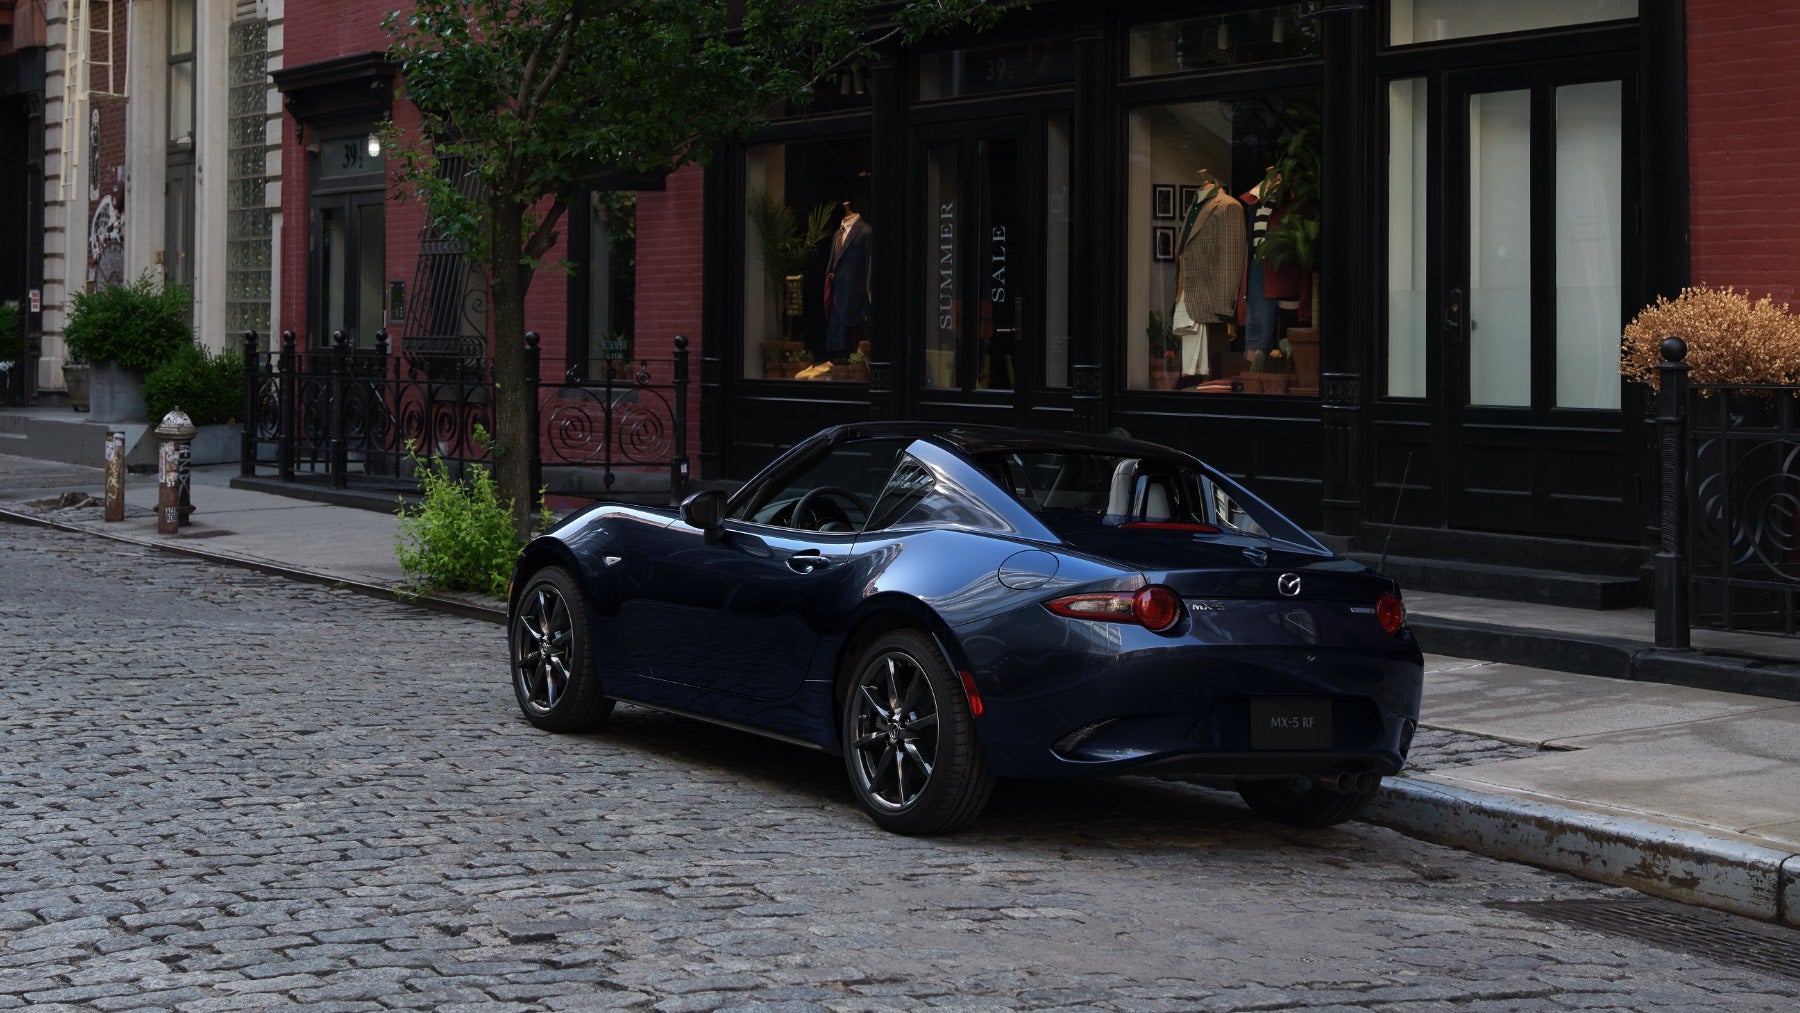 What's the Difference Between the Mazda MX-5 Miata and MX-5 Miata RF?